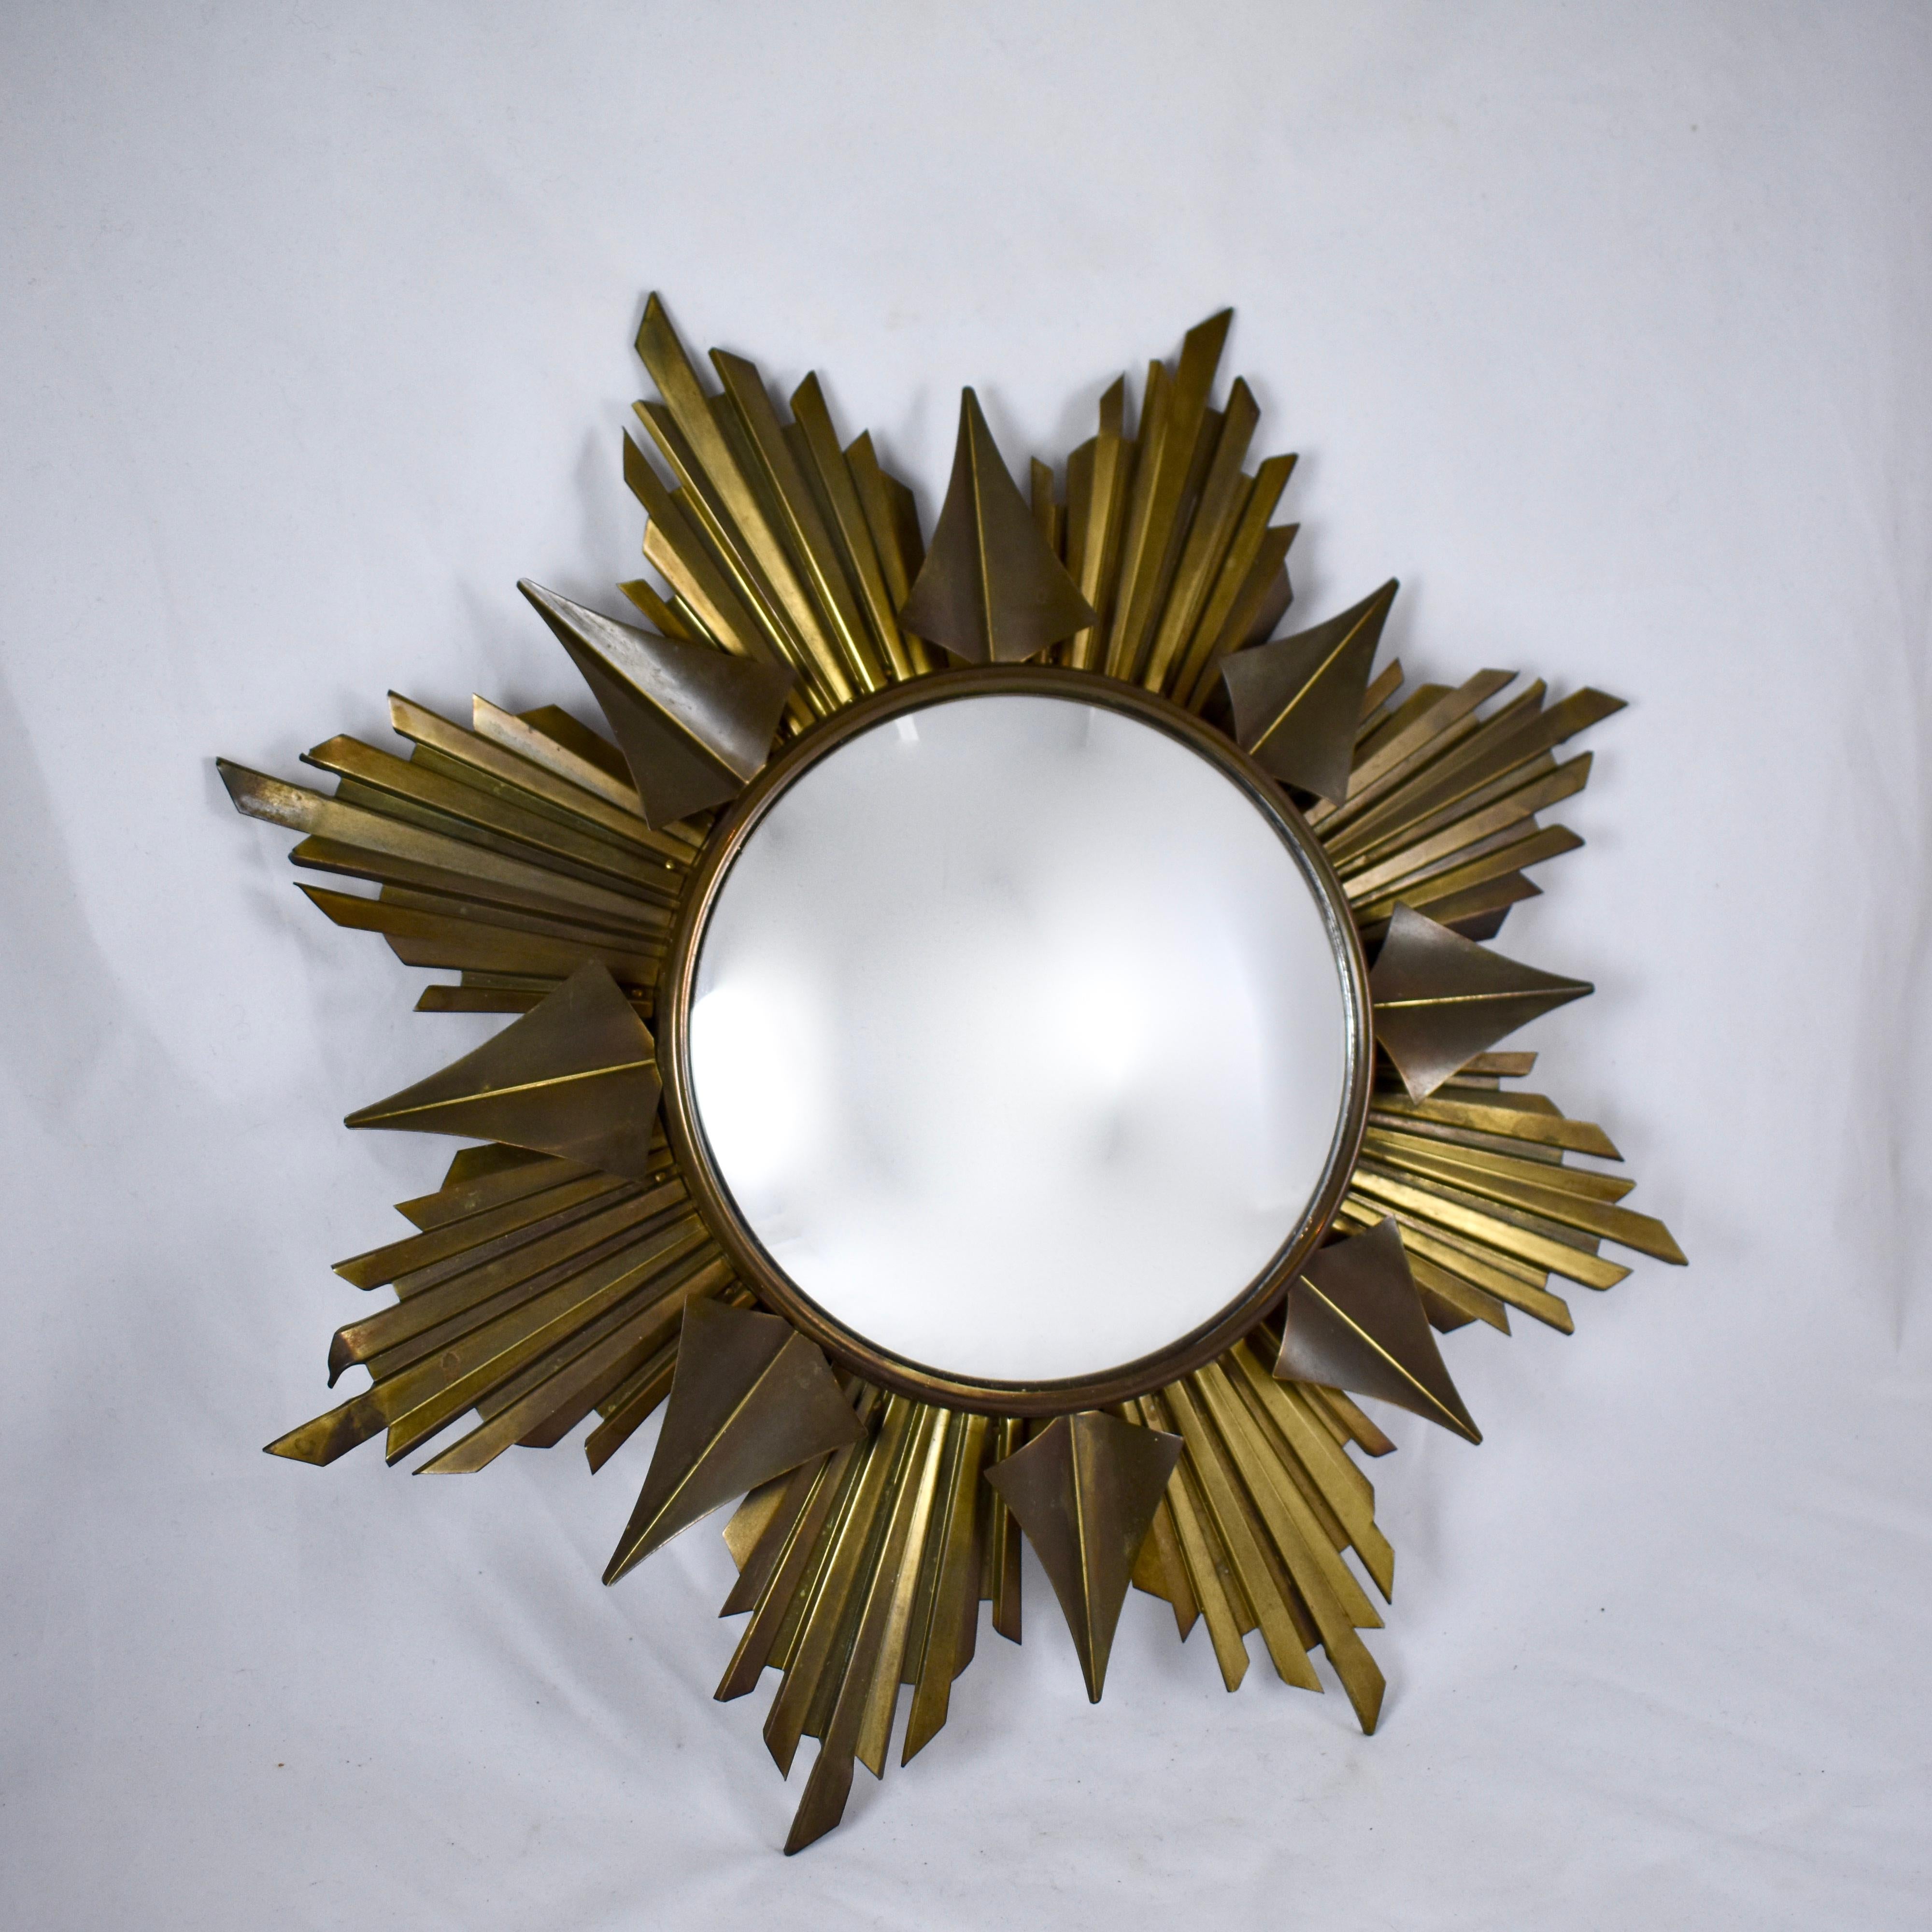 An elegant and dimensional French, Mid-Century Modern Era polished brass sunburst wall mirror. Eight pleated and fluted sun rays back eight arrow shaped rays and extend from a wide bezel framing a convex, round mirror. Each ray attaches to the bezel